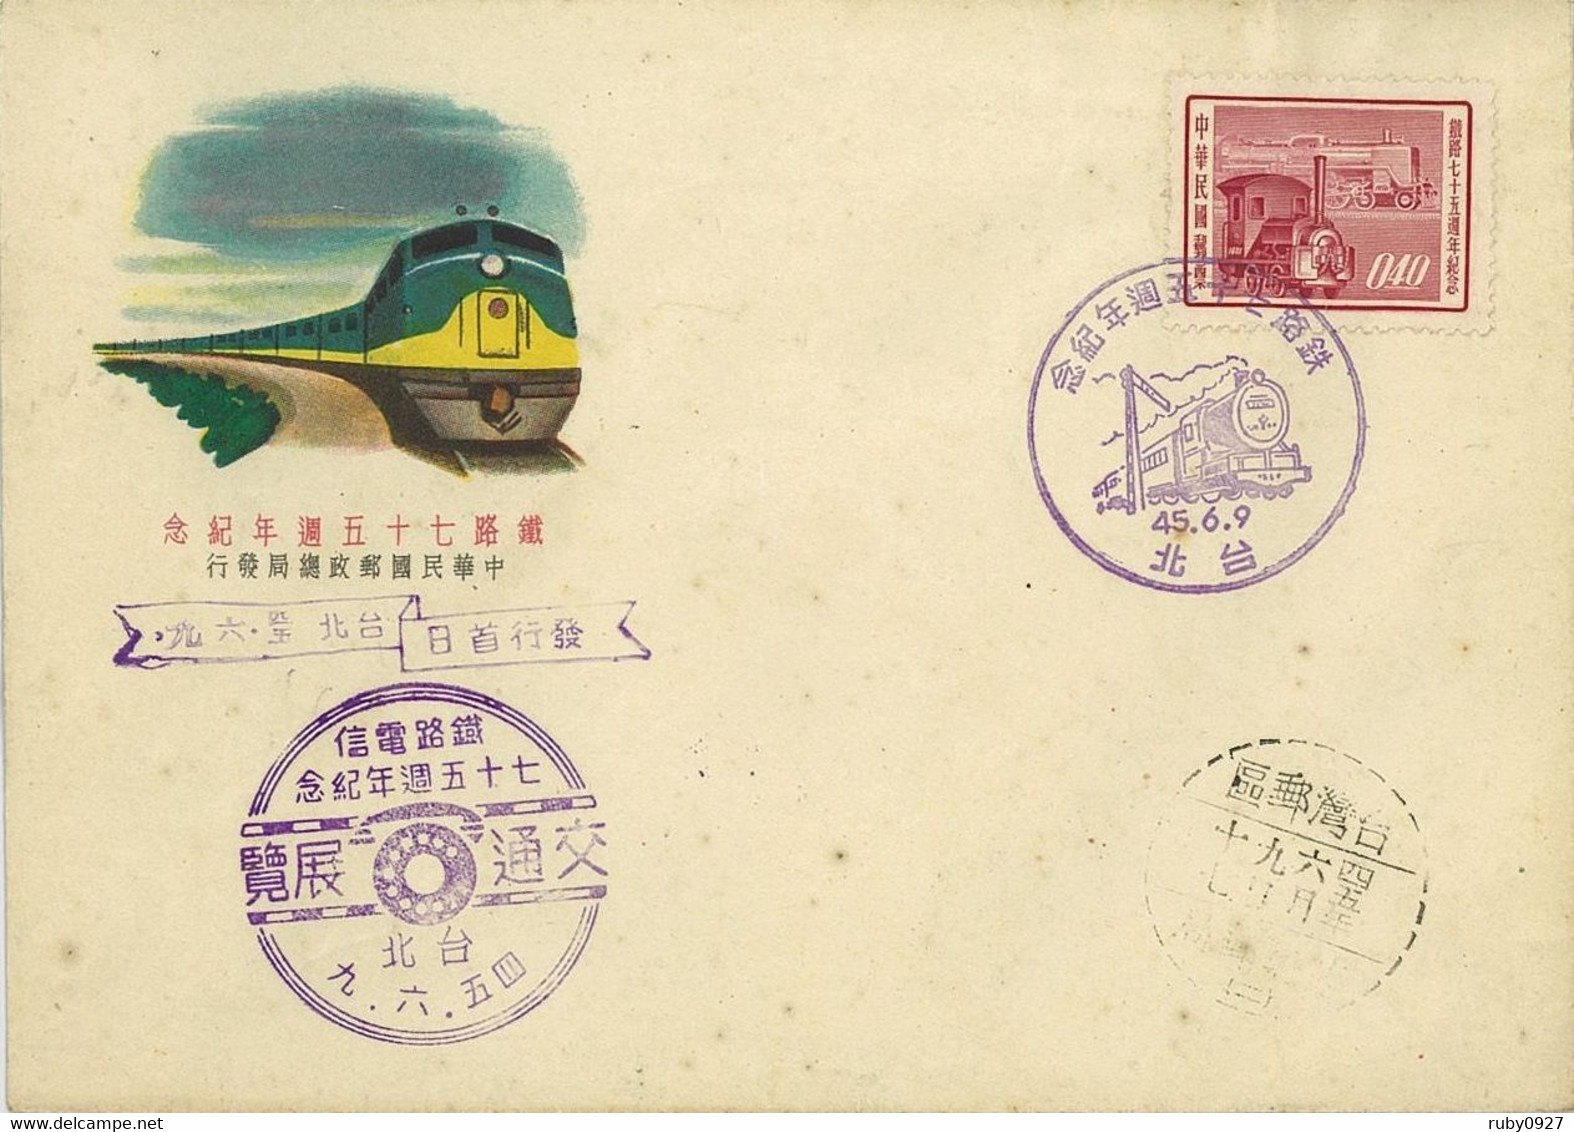 TAIWAN 1956 CHINA CHINESE RAILWAY 75TH ANNIVERSAIRY FIRST DAY COVER, TRAIN, TRAINS, LOCOMOTIVE, TRANSPORT - Briefe U. Dokumente